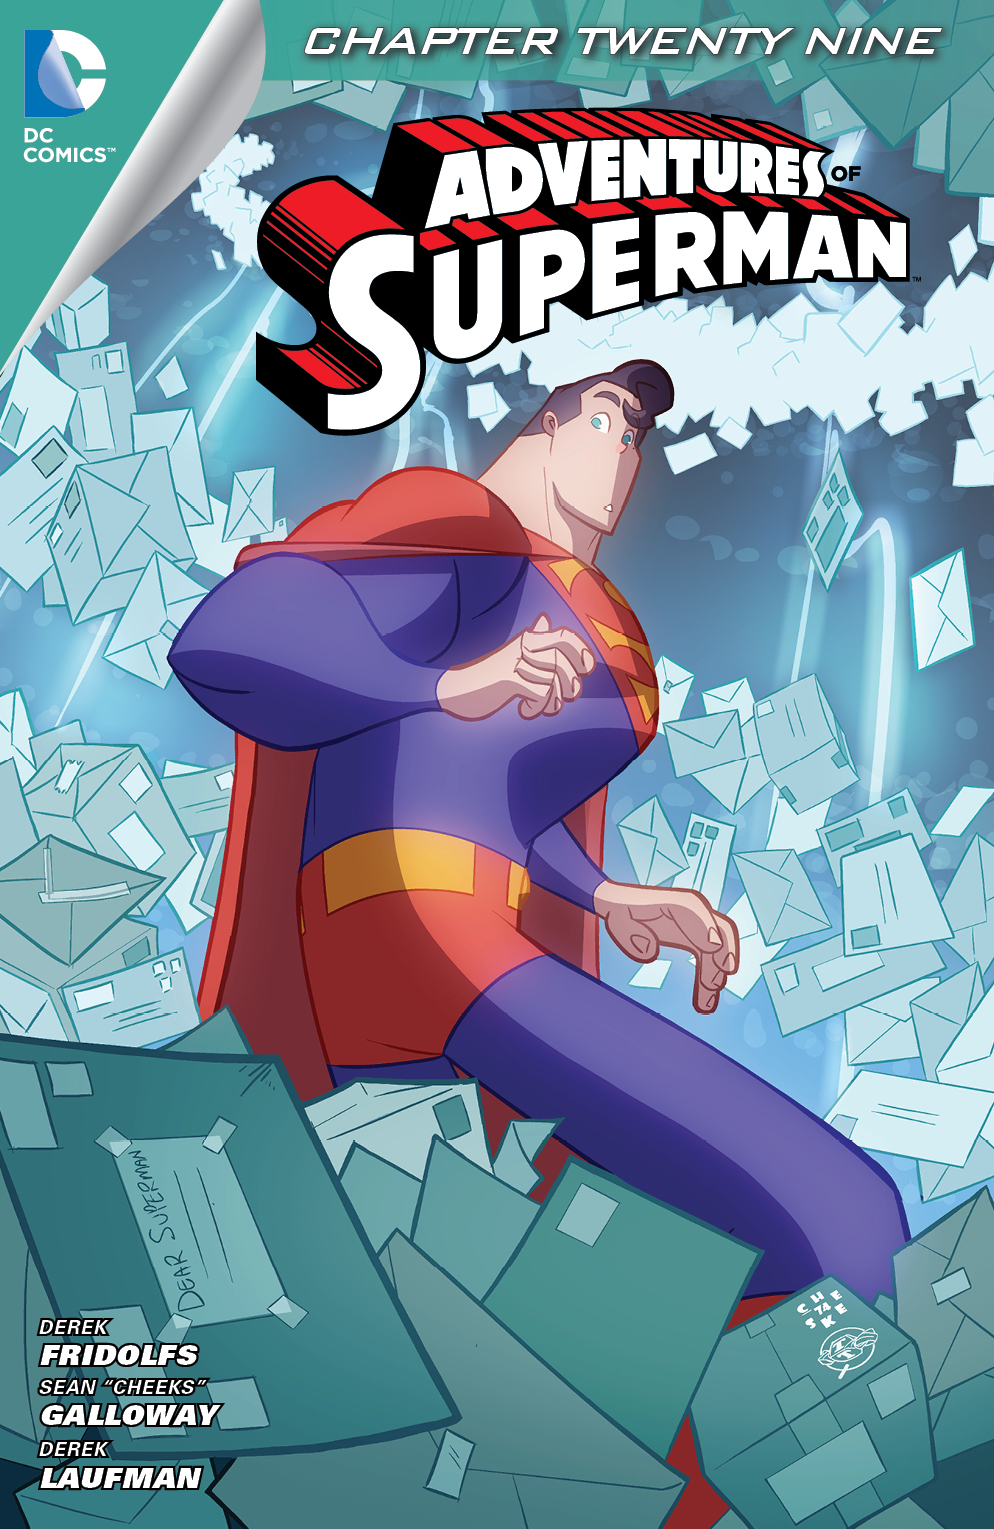 Adventures of Superman (2013-) #29 preview images